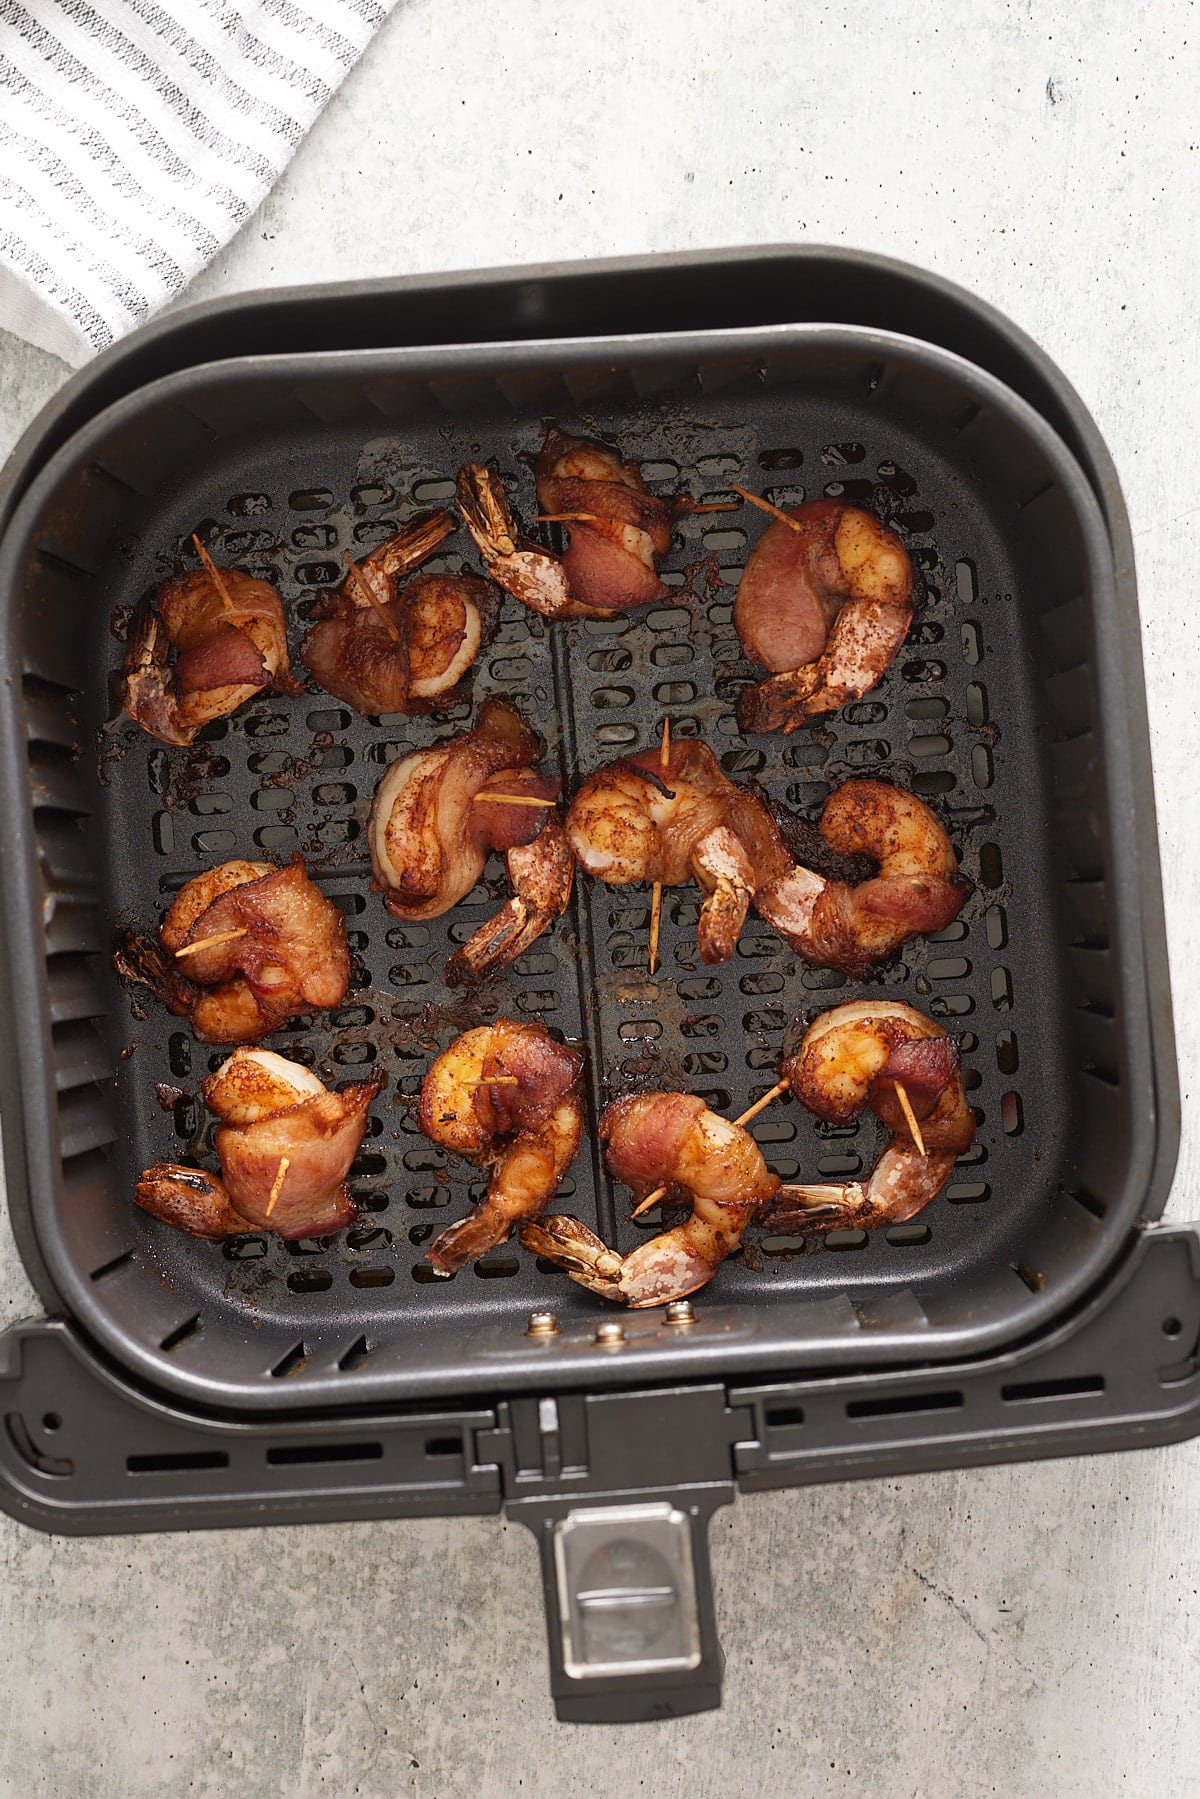 bacon wrapped in shrimp in air fryer basket